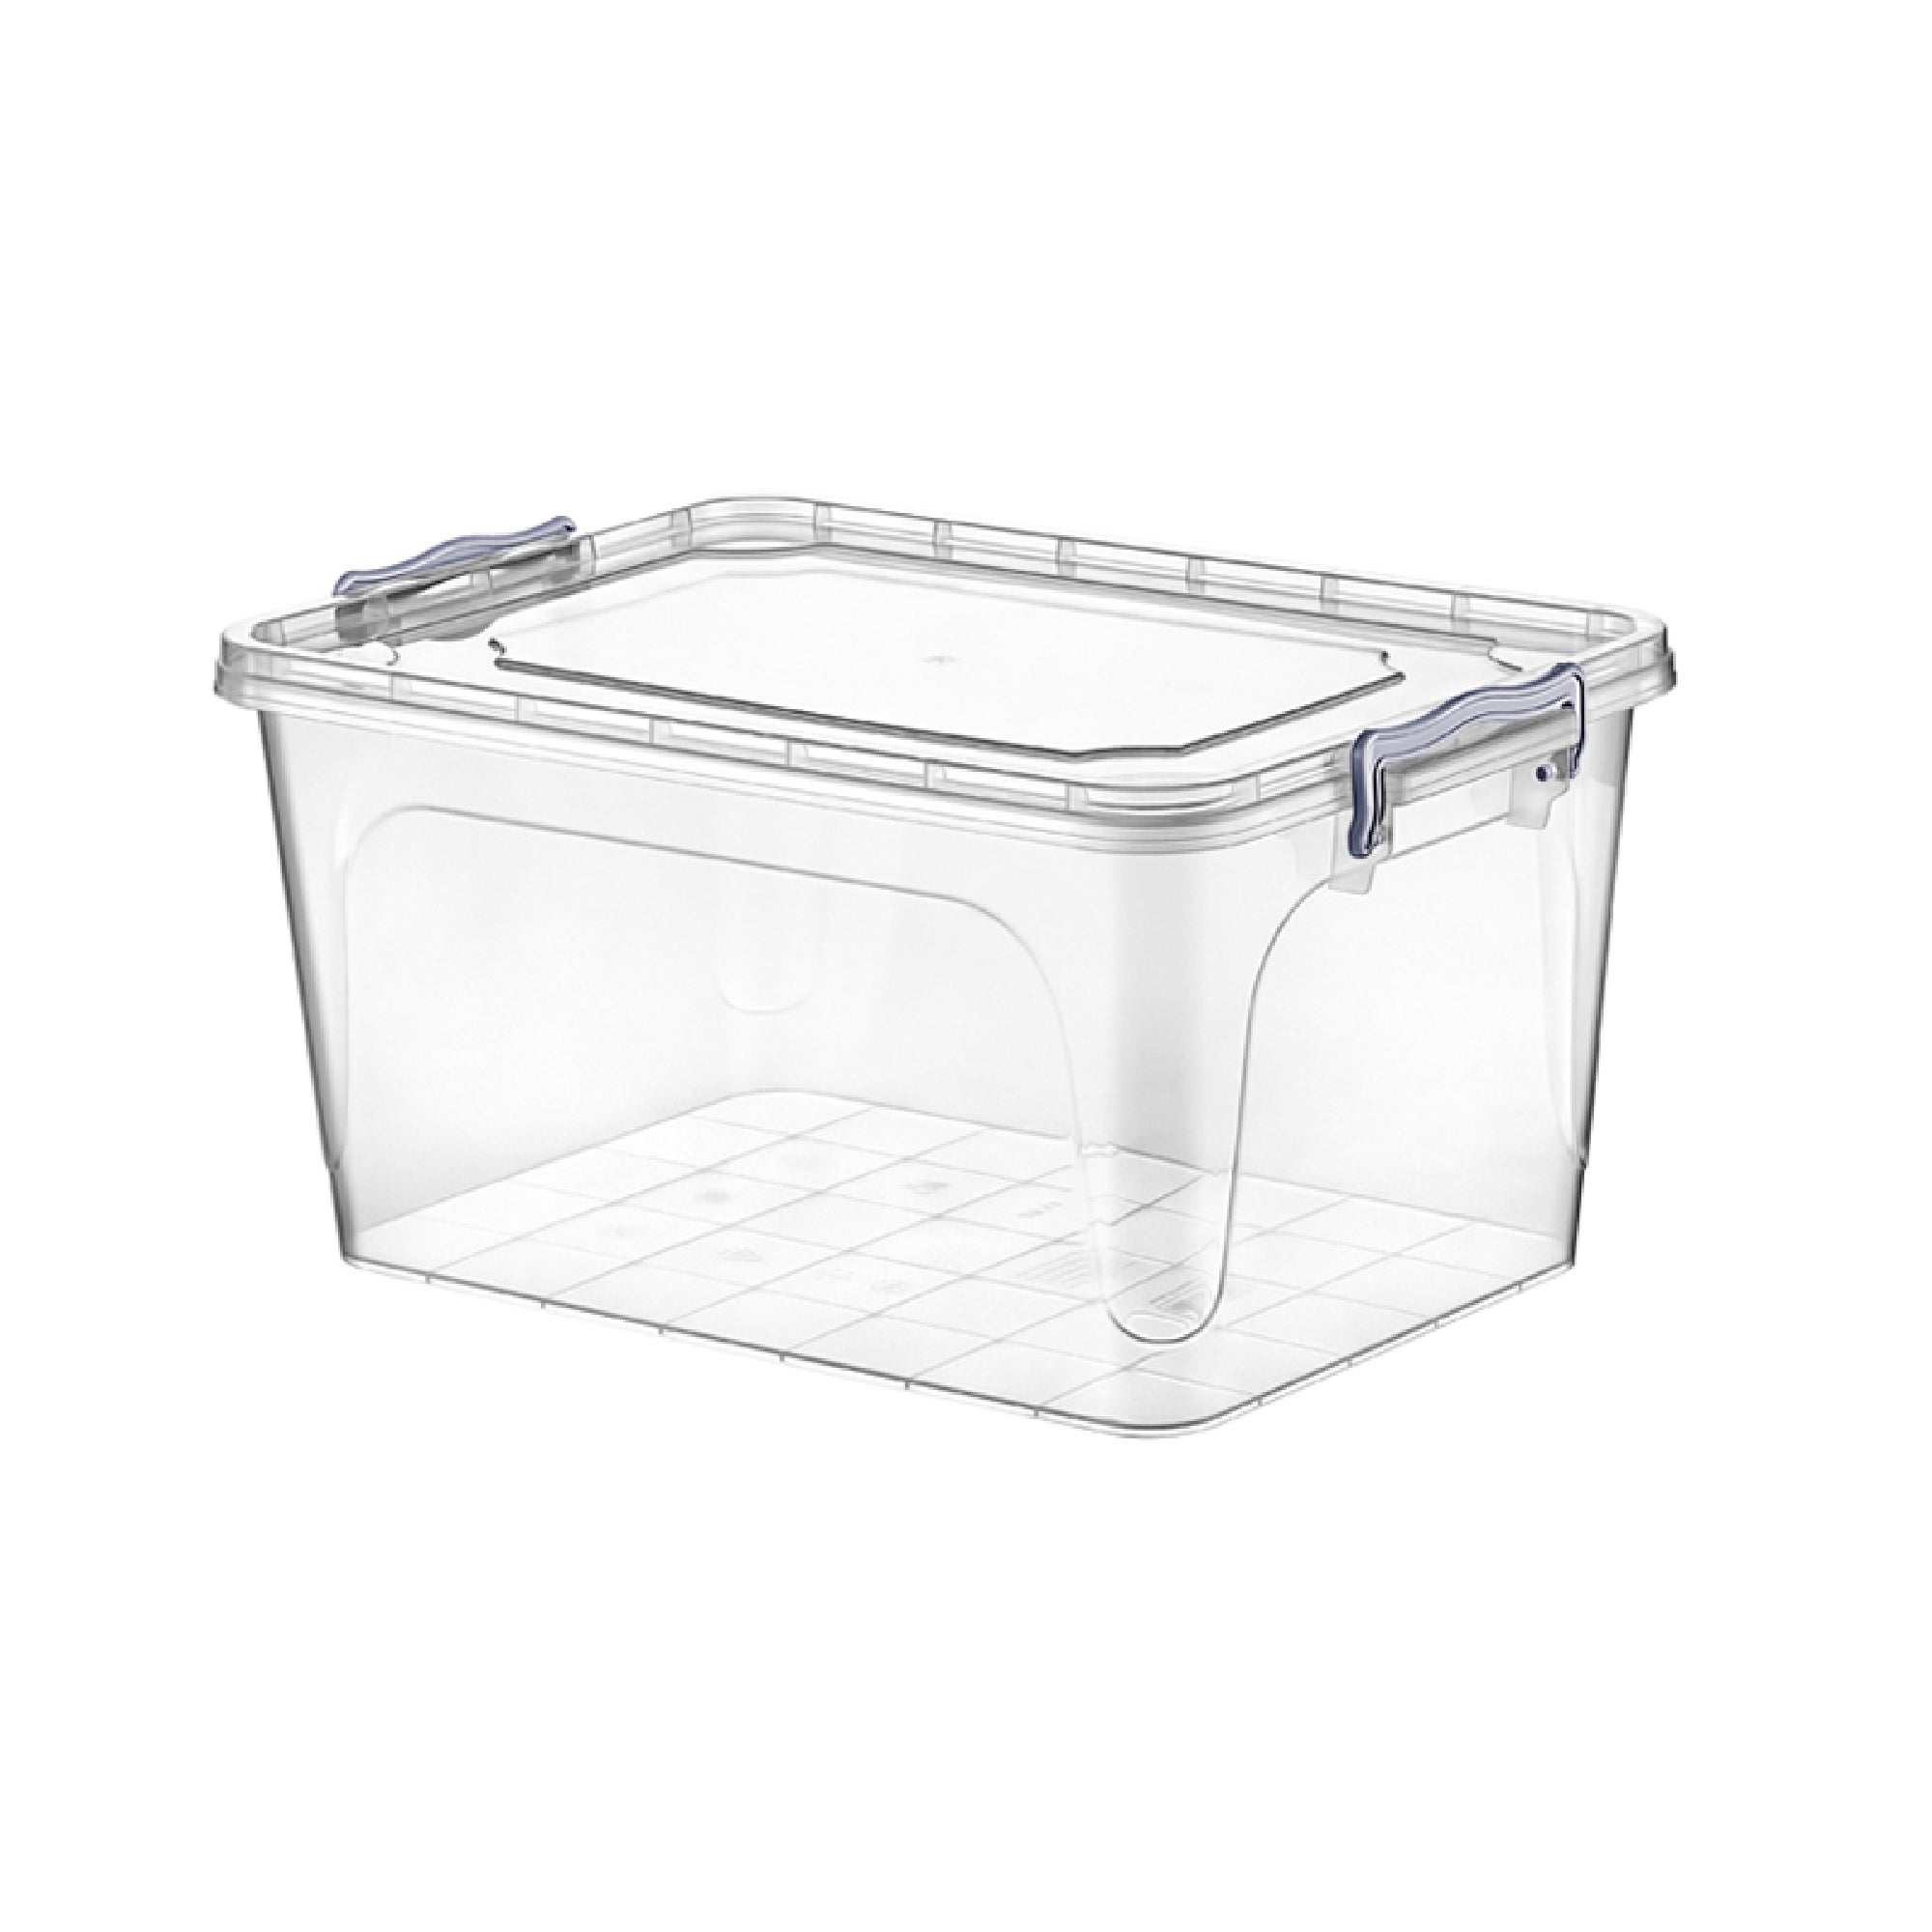 Hobby Life Plastic Storage Utility Container Multi Box Rectangle 25L 021105